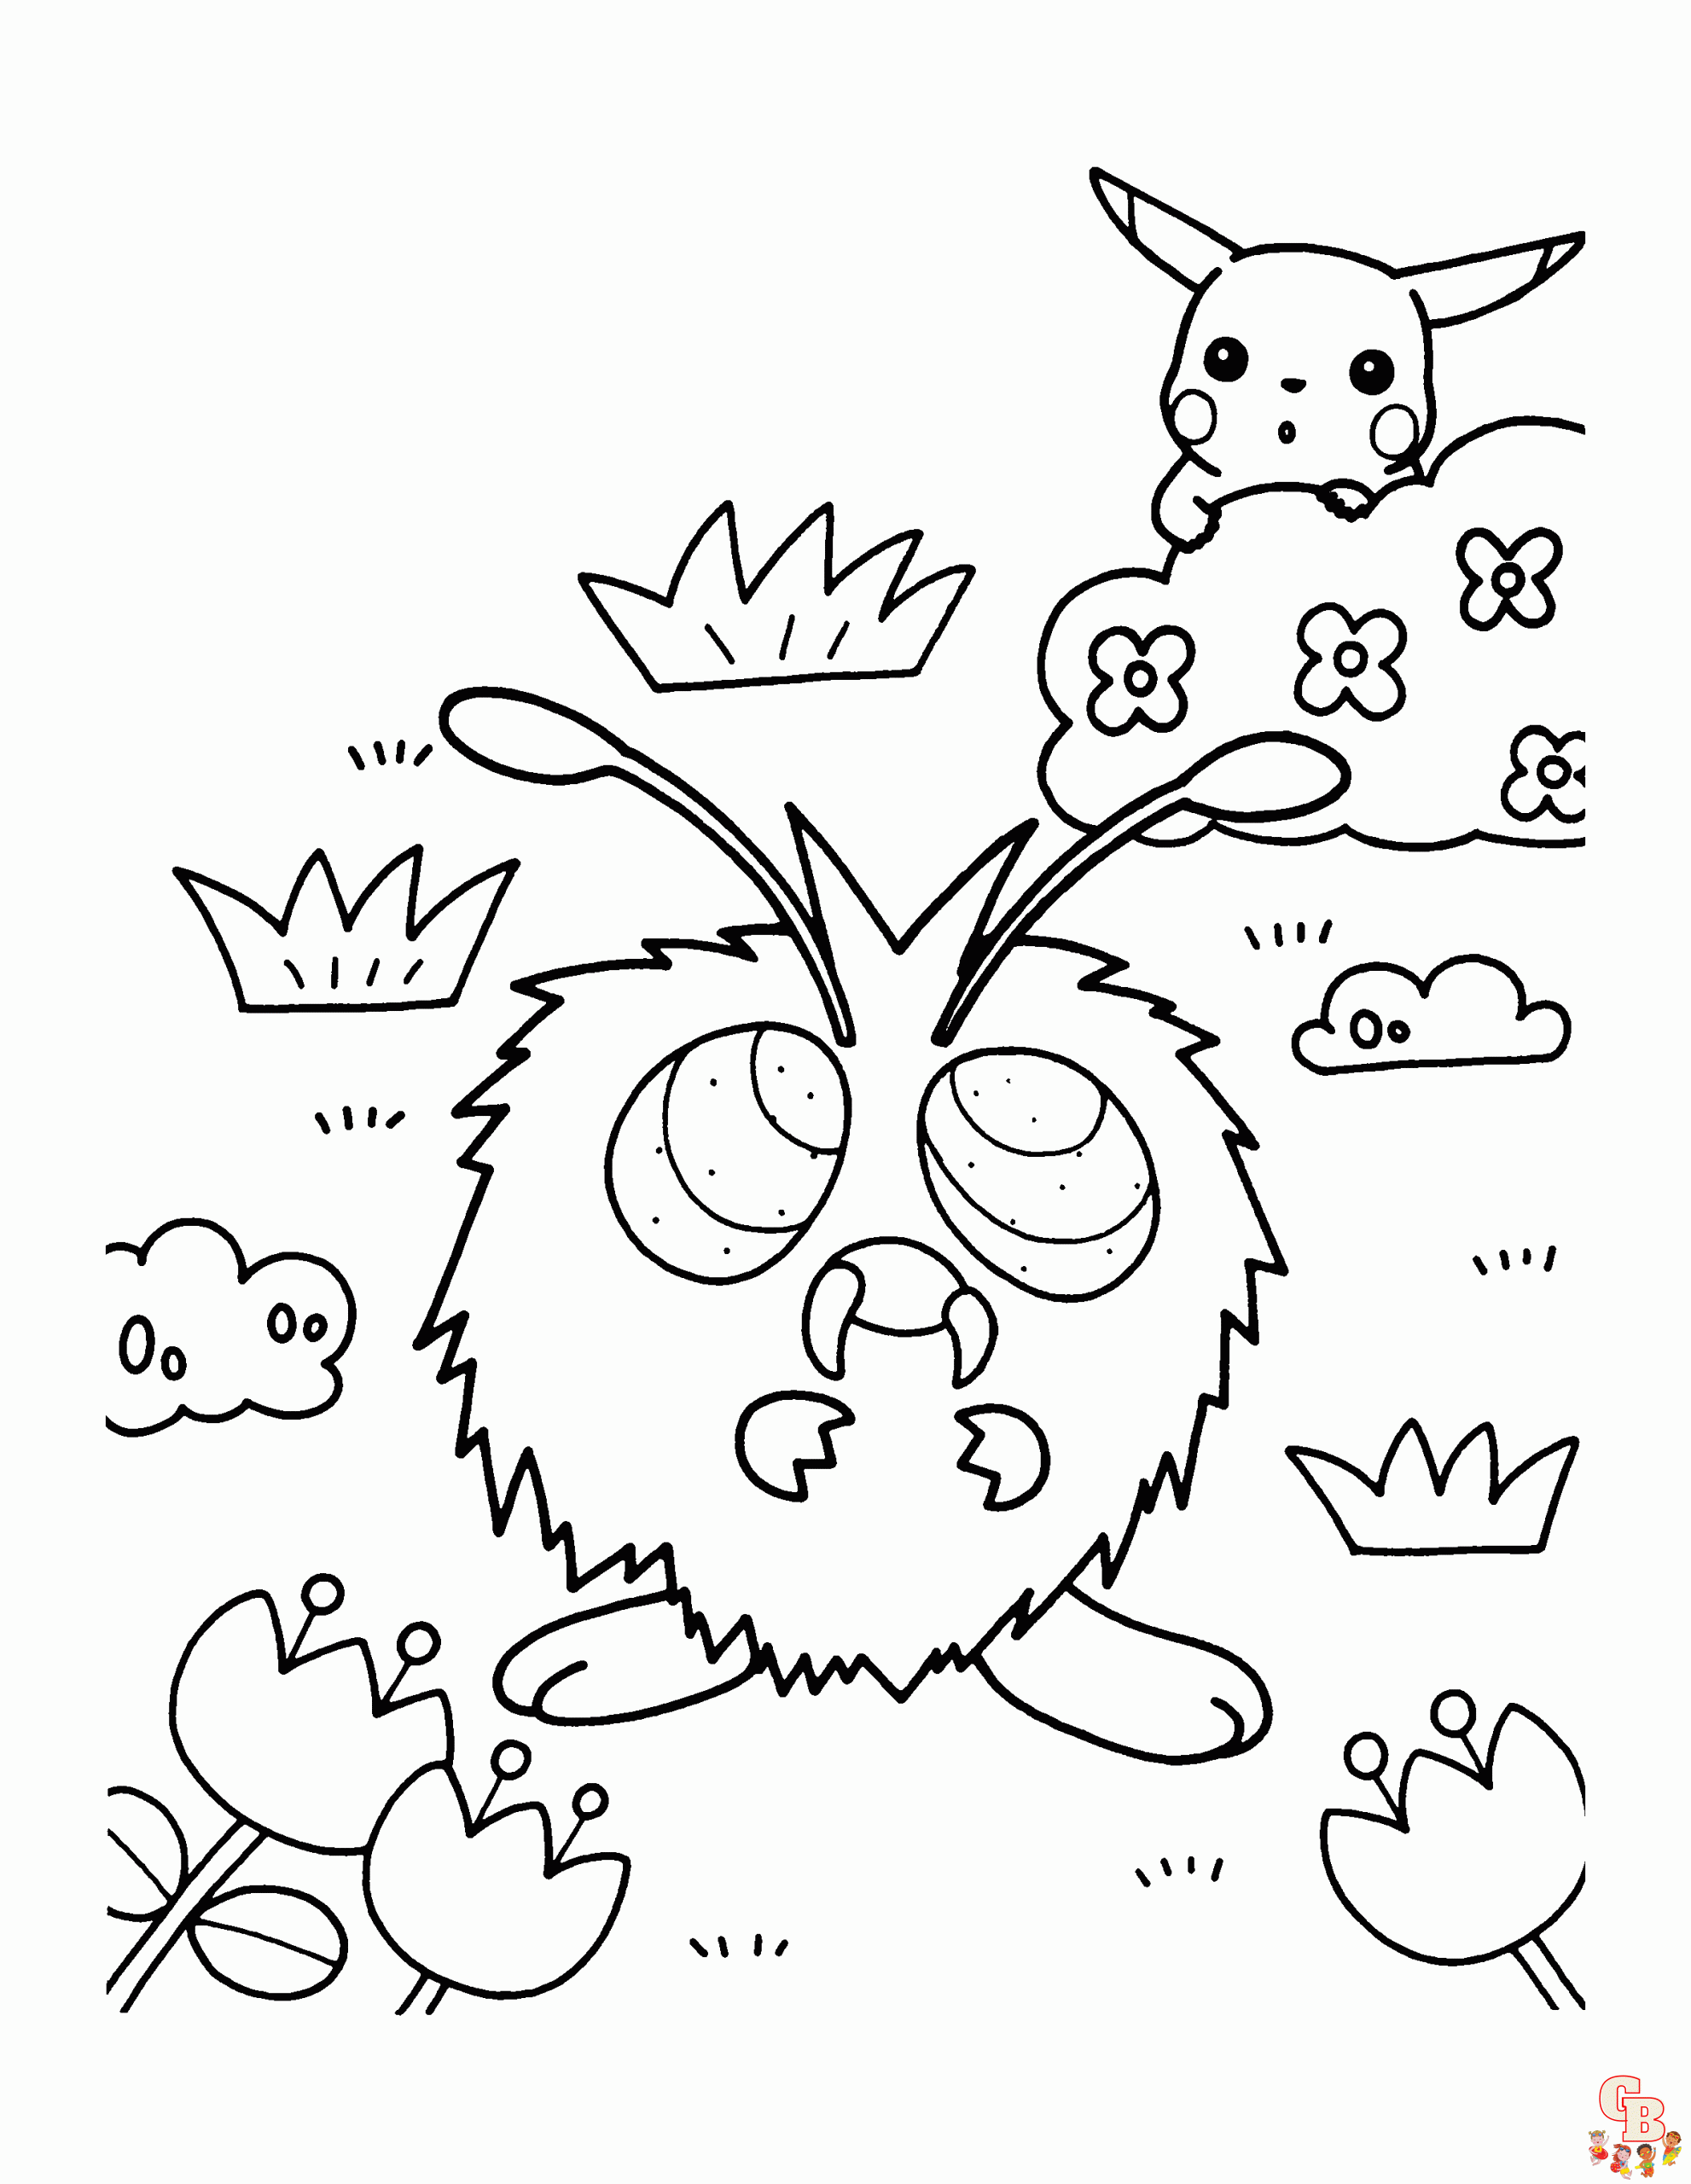 Cute Pokemon coloring pages 14 1